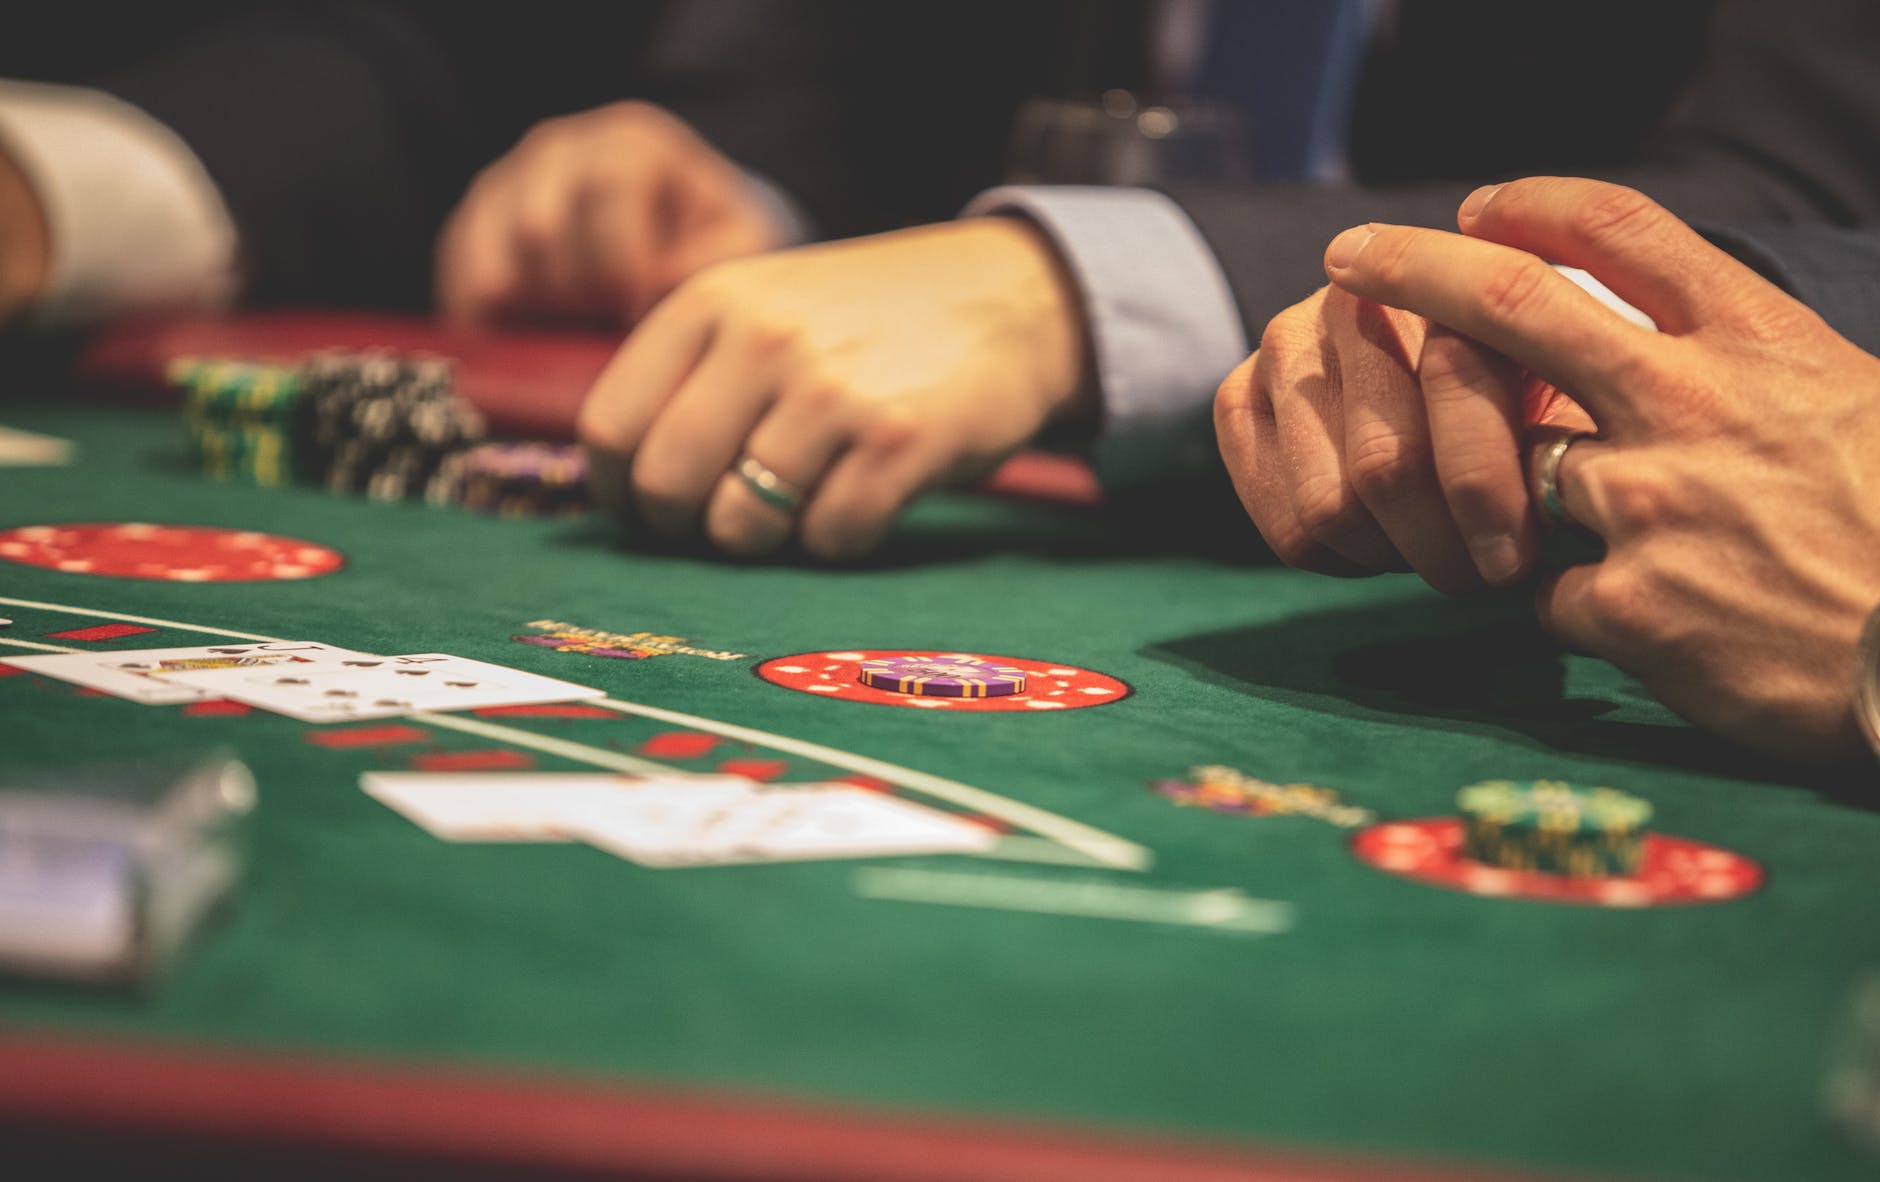 texas holdem practiceLike An Expert. Follow These 5 Steps To Get There